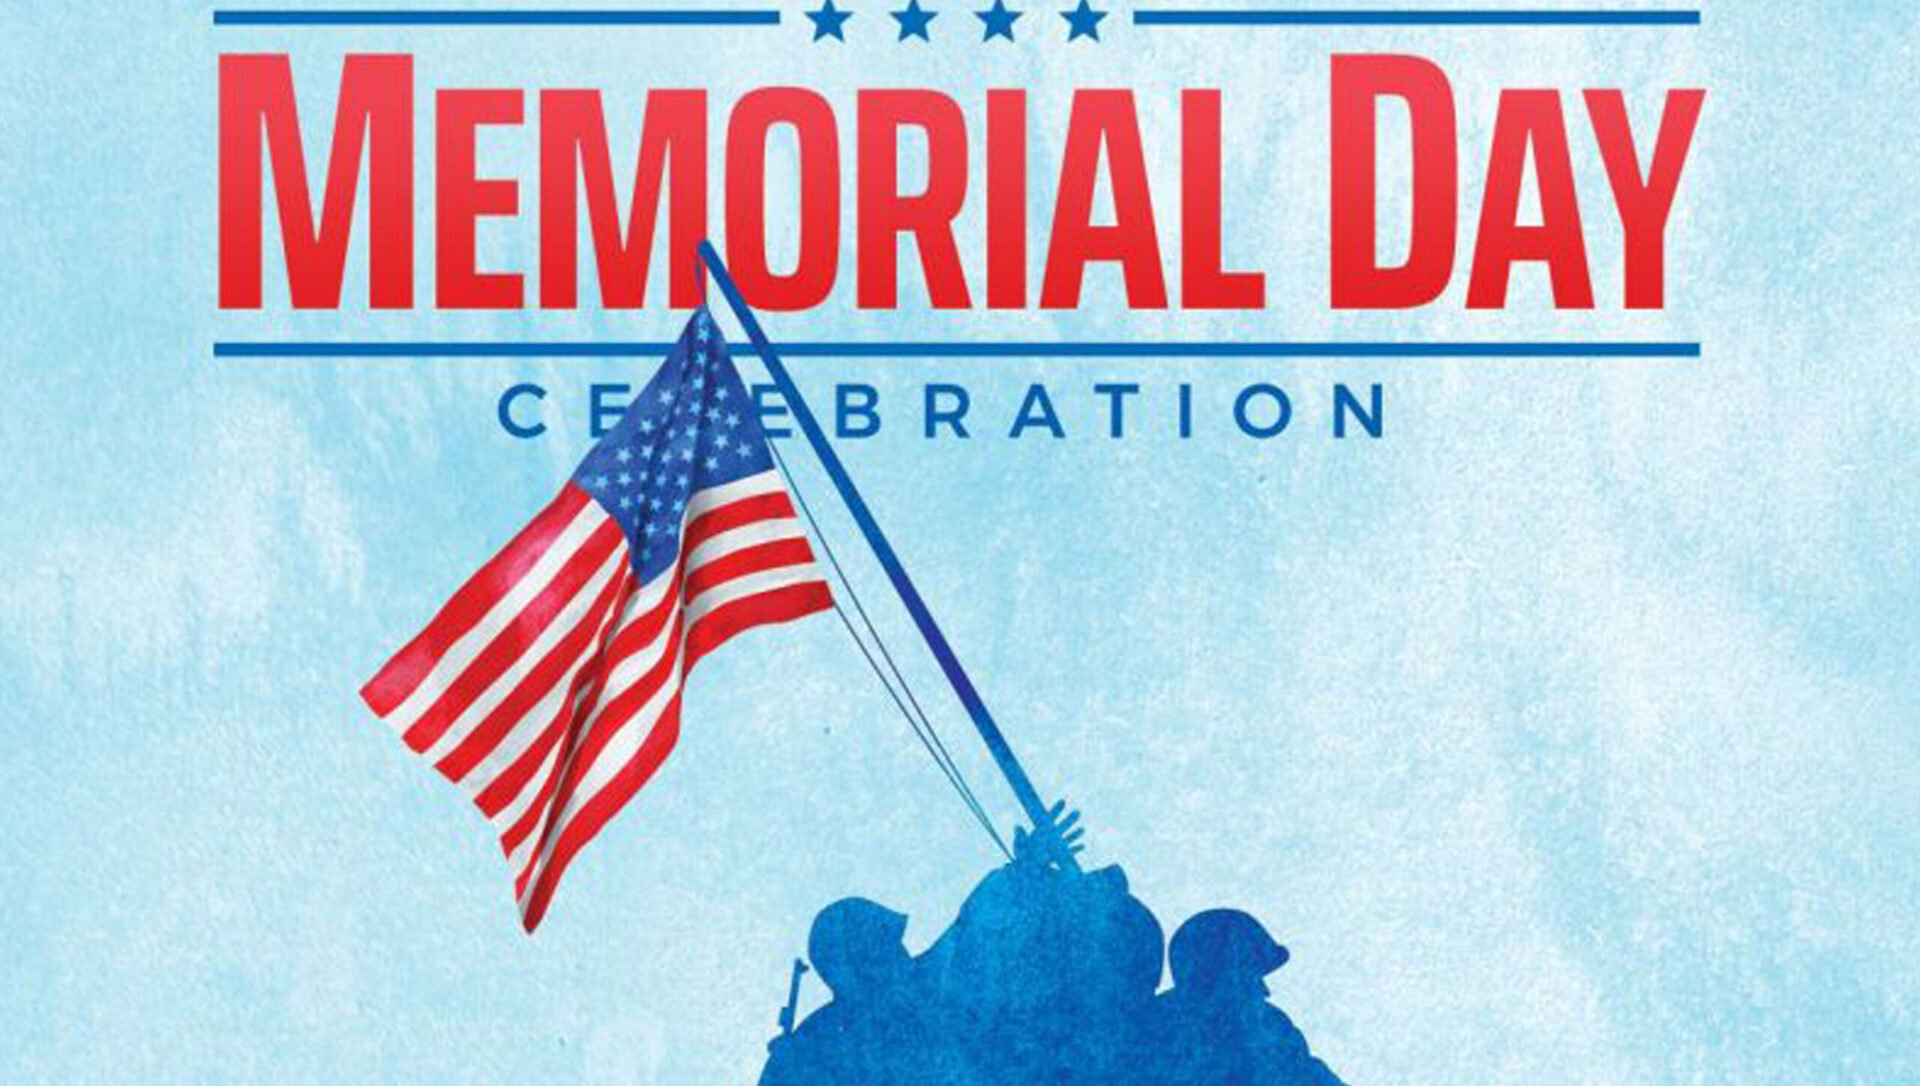 Happy Memorial Day, from ECHO81! ECHO81 is Premier Supplier of Underwater Survey Technologies Rental Sales Training Offshore Hydrography Geophysics.